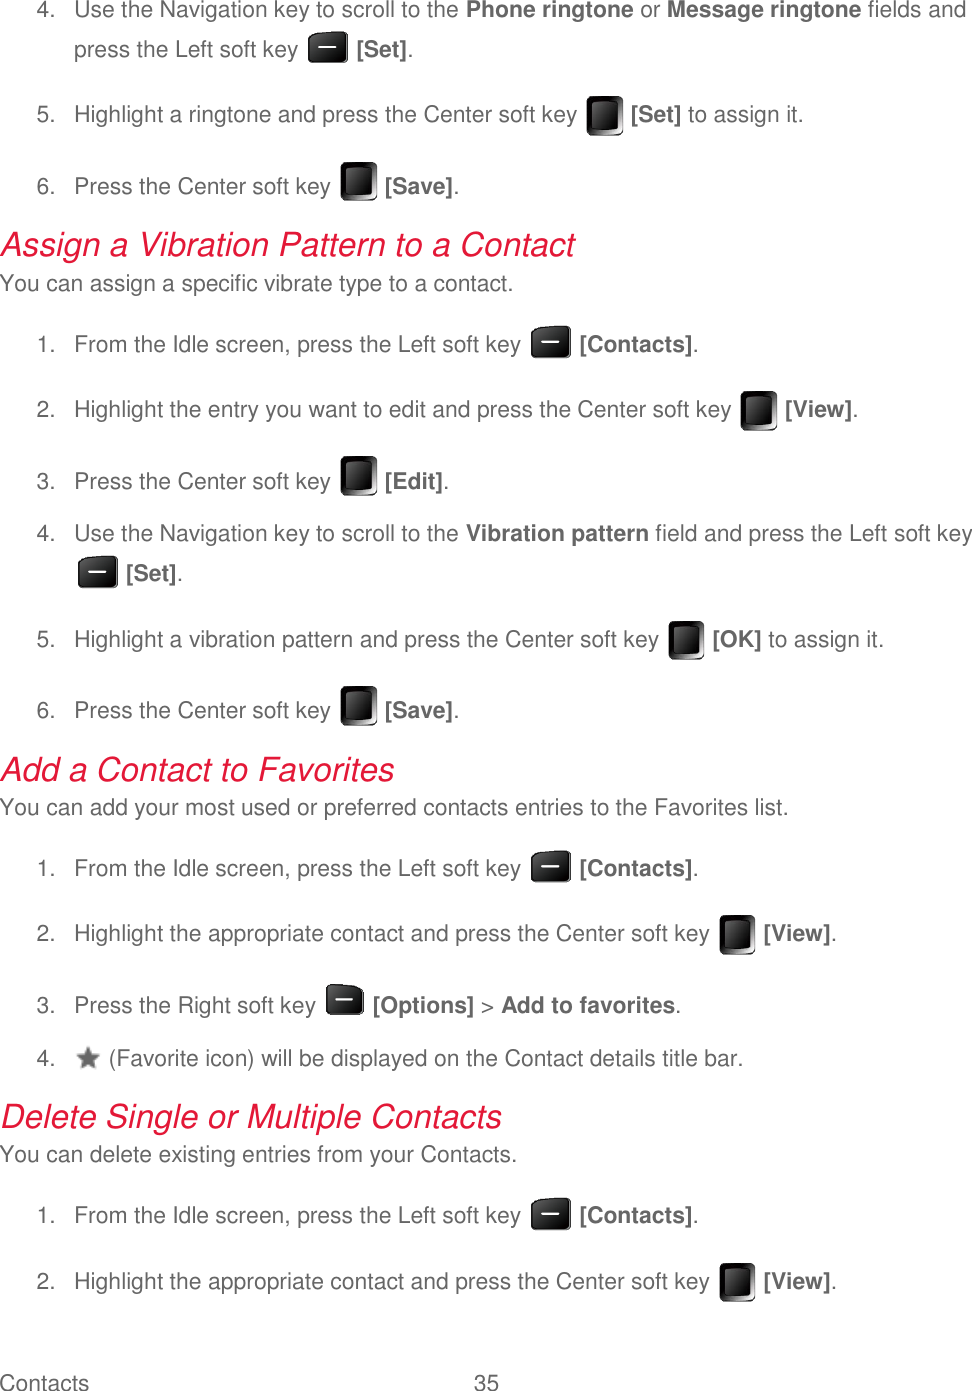 Contacts  35     Use the Navigation key to scroll to the Phone ringtone or Message ringtone fields and 4.press the Left soft key   [Set].   Highlight a ringtone and press the Center soft key   [Set] to assign it. 5.  Press the Center soft key   [Save]. 6.Assign a Vibration Pattern to a Contact You can assign a specific vibrate type to a contact.   From the Idle screen, press the Left soft key   [Contacts]. 1.  Highlight the entry you want to edit and press the Center soft key   [View]. 2.  Press the Center soft key   [Edit]. 3.  Use the Navigation key to scroll to the Vibration pattern field and press the Left soft key 4. [Set].   Highlight a vibration pattern and press the Center soft key   [OK] to assign it. 5.  Press the Center soft key   [Save]. 6.Add a Contact to Favorites You can add your most used or preferred contacts entries to the Favorites list.   From the Idle screen, press the Left soft key   [Contacts]. 1.  Highlight the appropriate contact and press the Center soft key   [View]. 2.  Press the Right soft key   [Options] &gt; Add to favorites. 3.   (Favorite icon) will be displayed on the Contact details title bar. 4.Delete Single or Multiple Contacts  You can delete existing entries from your Contacts.   From the Idle screen, press the Left soft key   [Contacts]. 1.  Highlight the appropriate contact and press the Center soft key   [View]. 2.